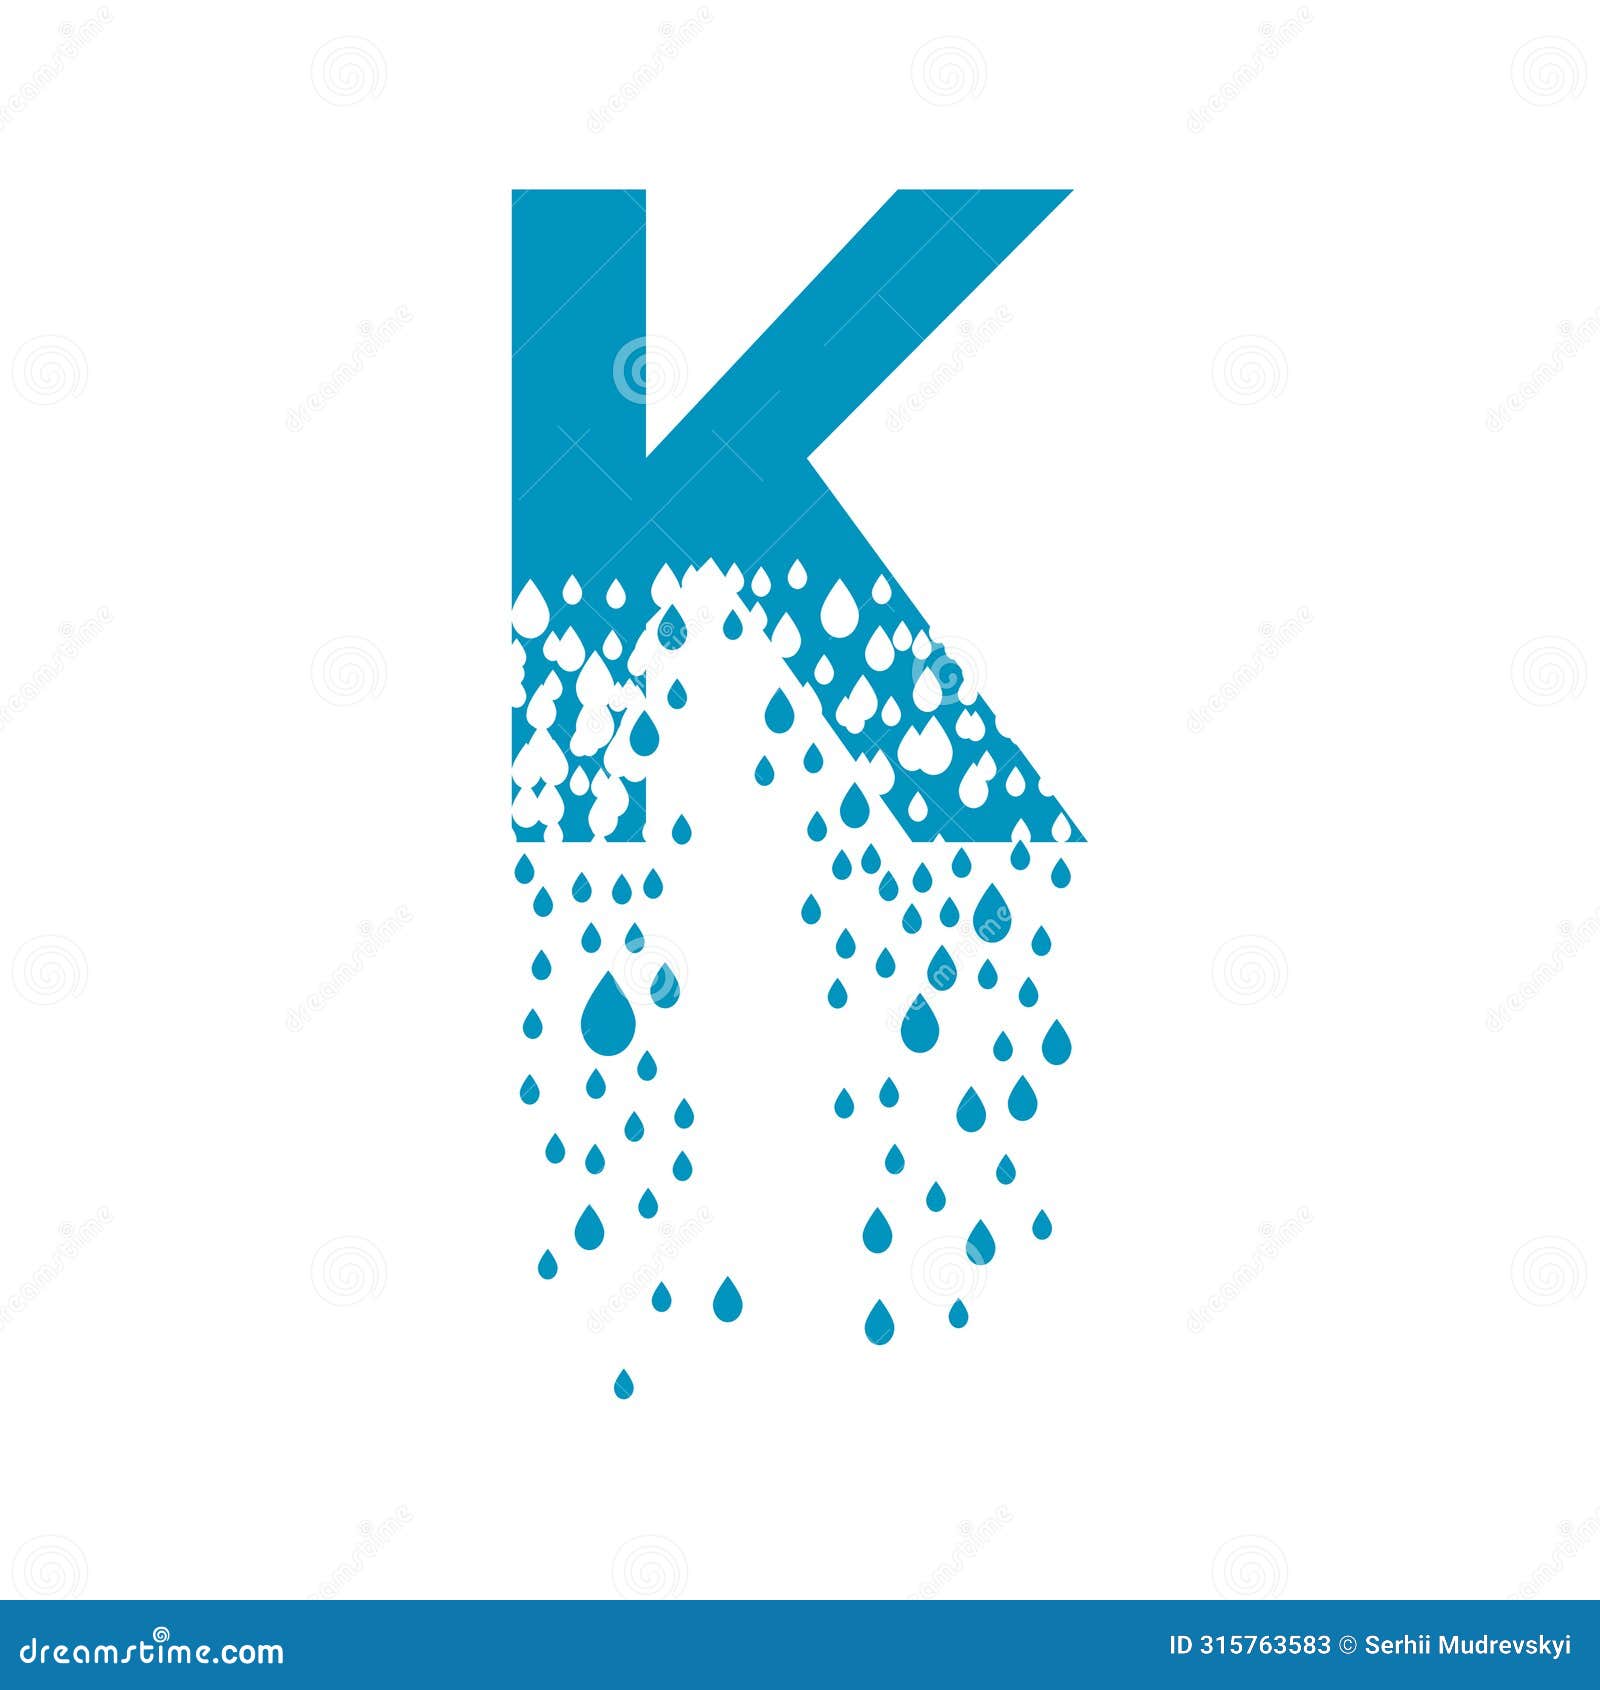 the letter k dissolves into droplets. drops of liquid fall out as precipitation. destruction effect. dispersion